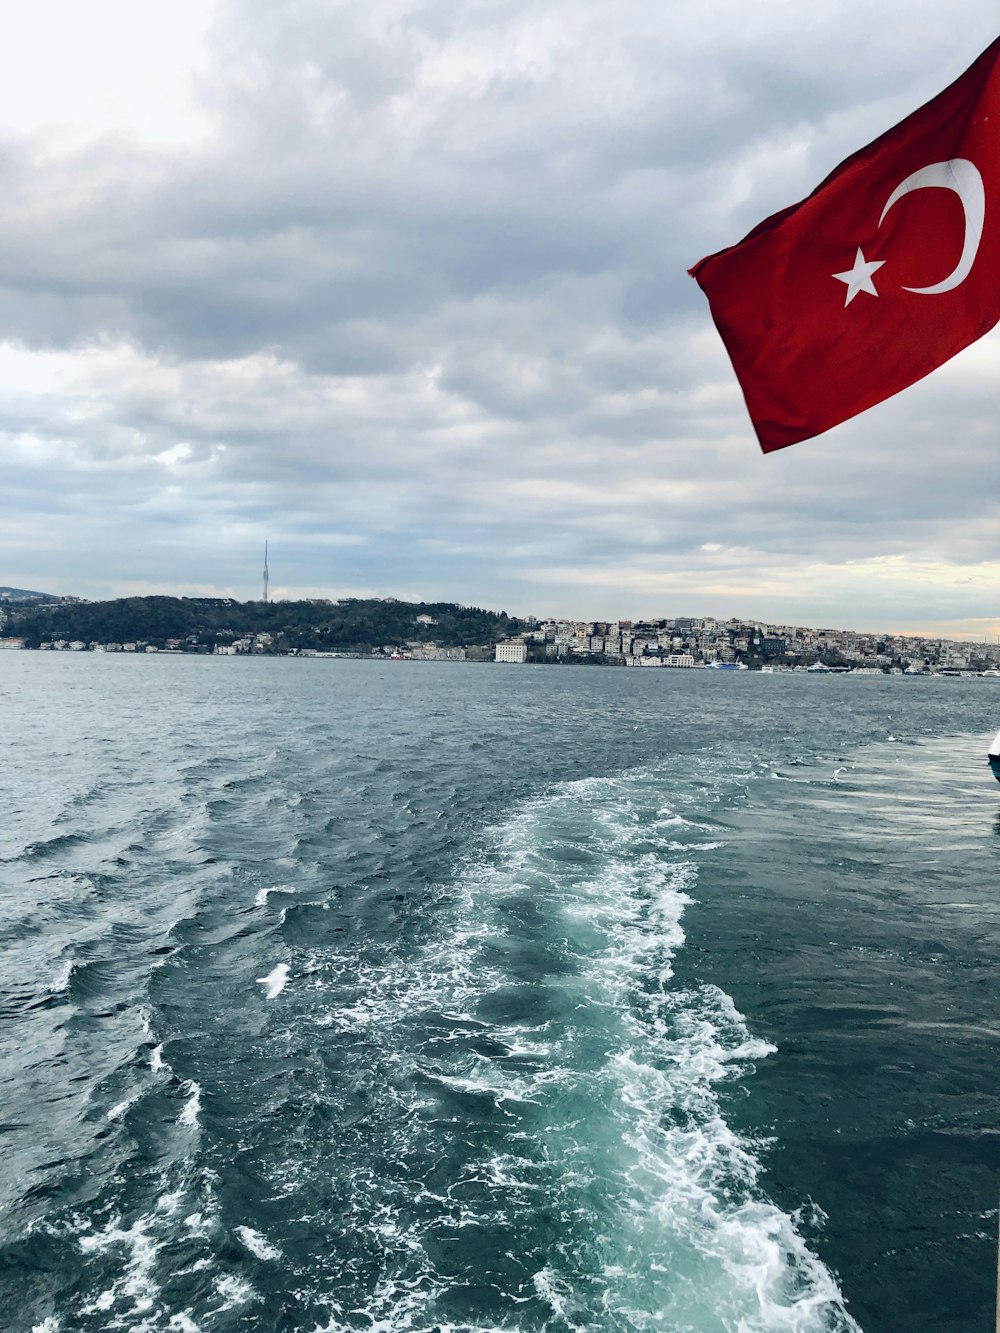 a turkish flag flying over a boat in the water